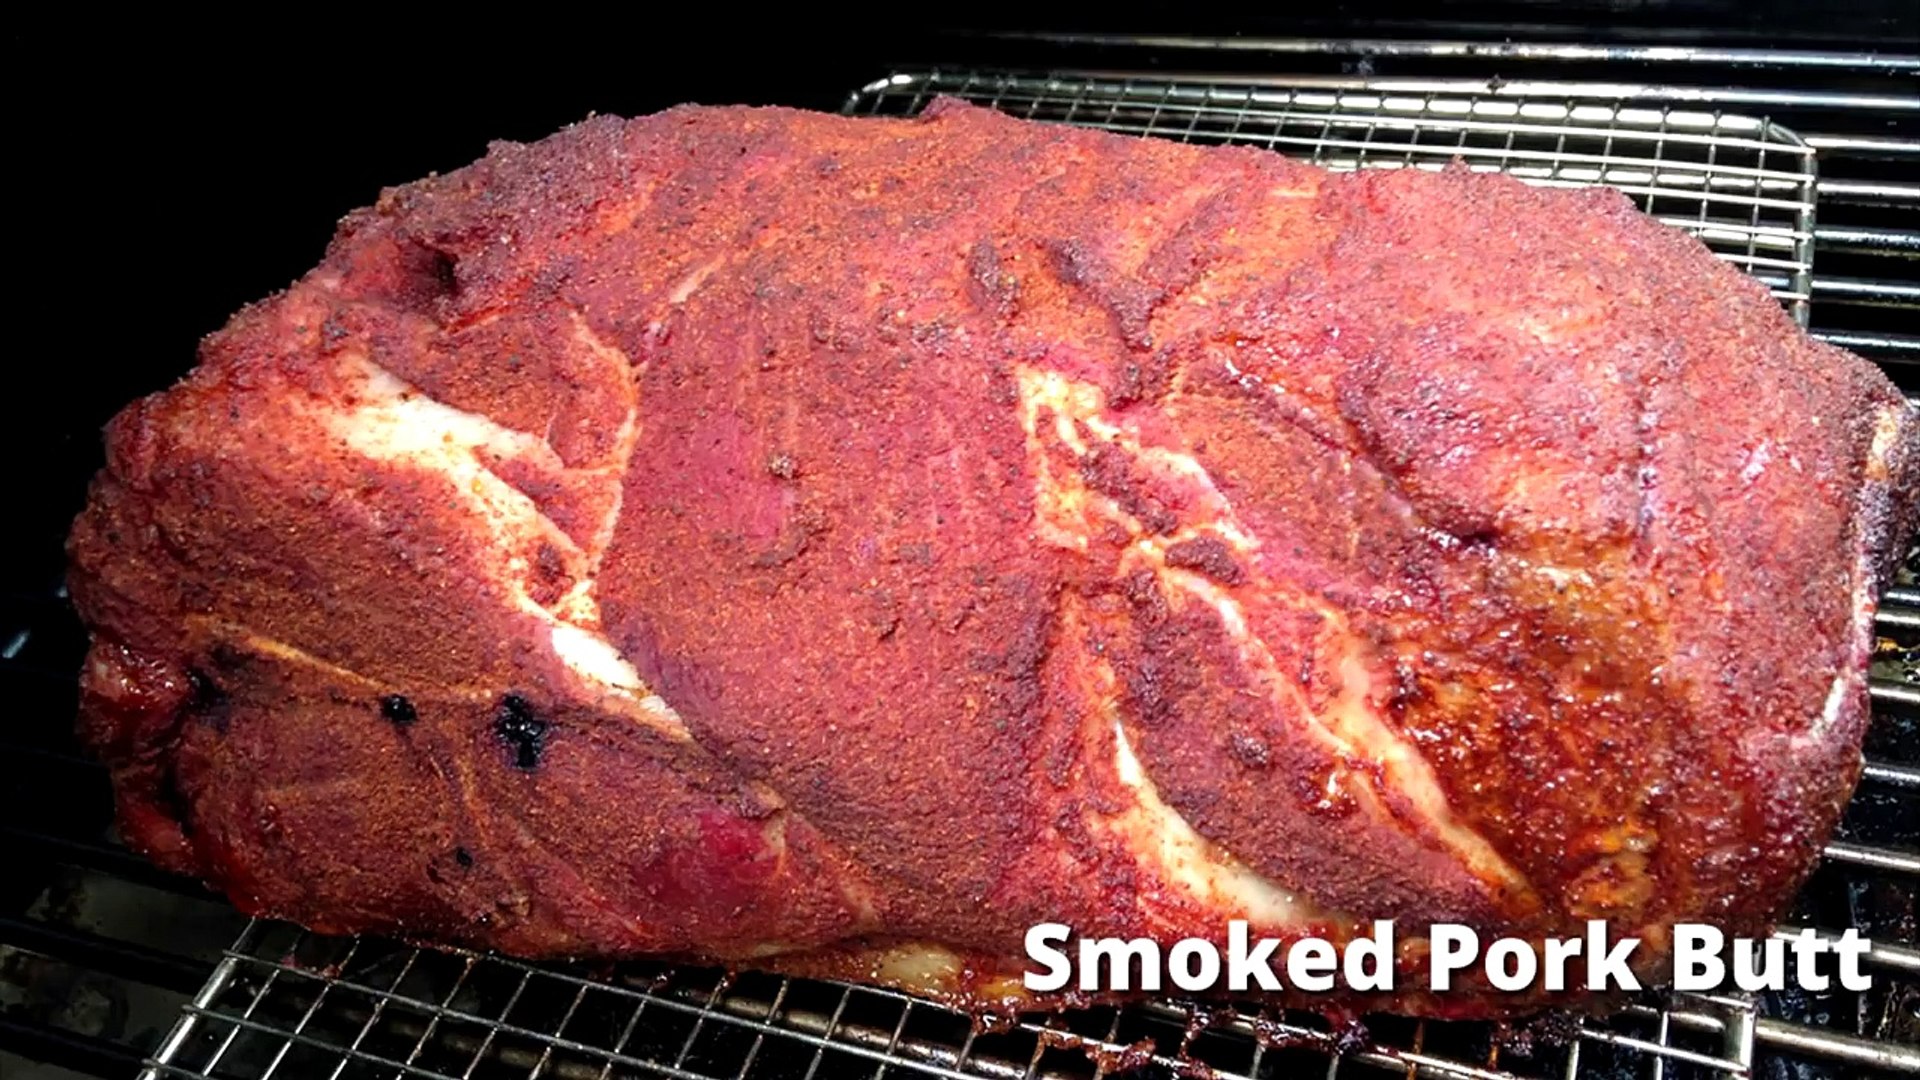 ⁣Smoked Pork Butt | Smoking Pork Butt for Pulled Pork HowToBBQRight with Malcom Reed